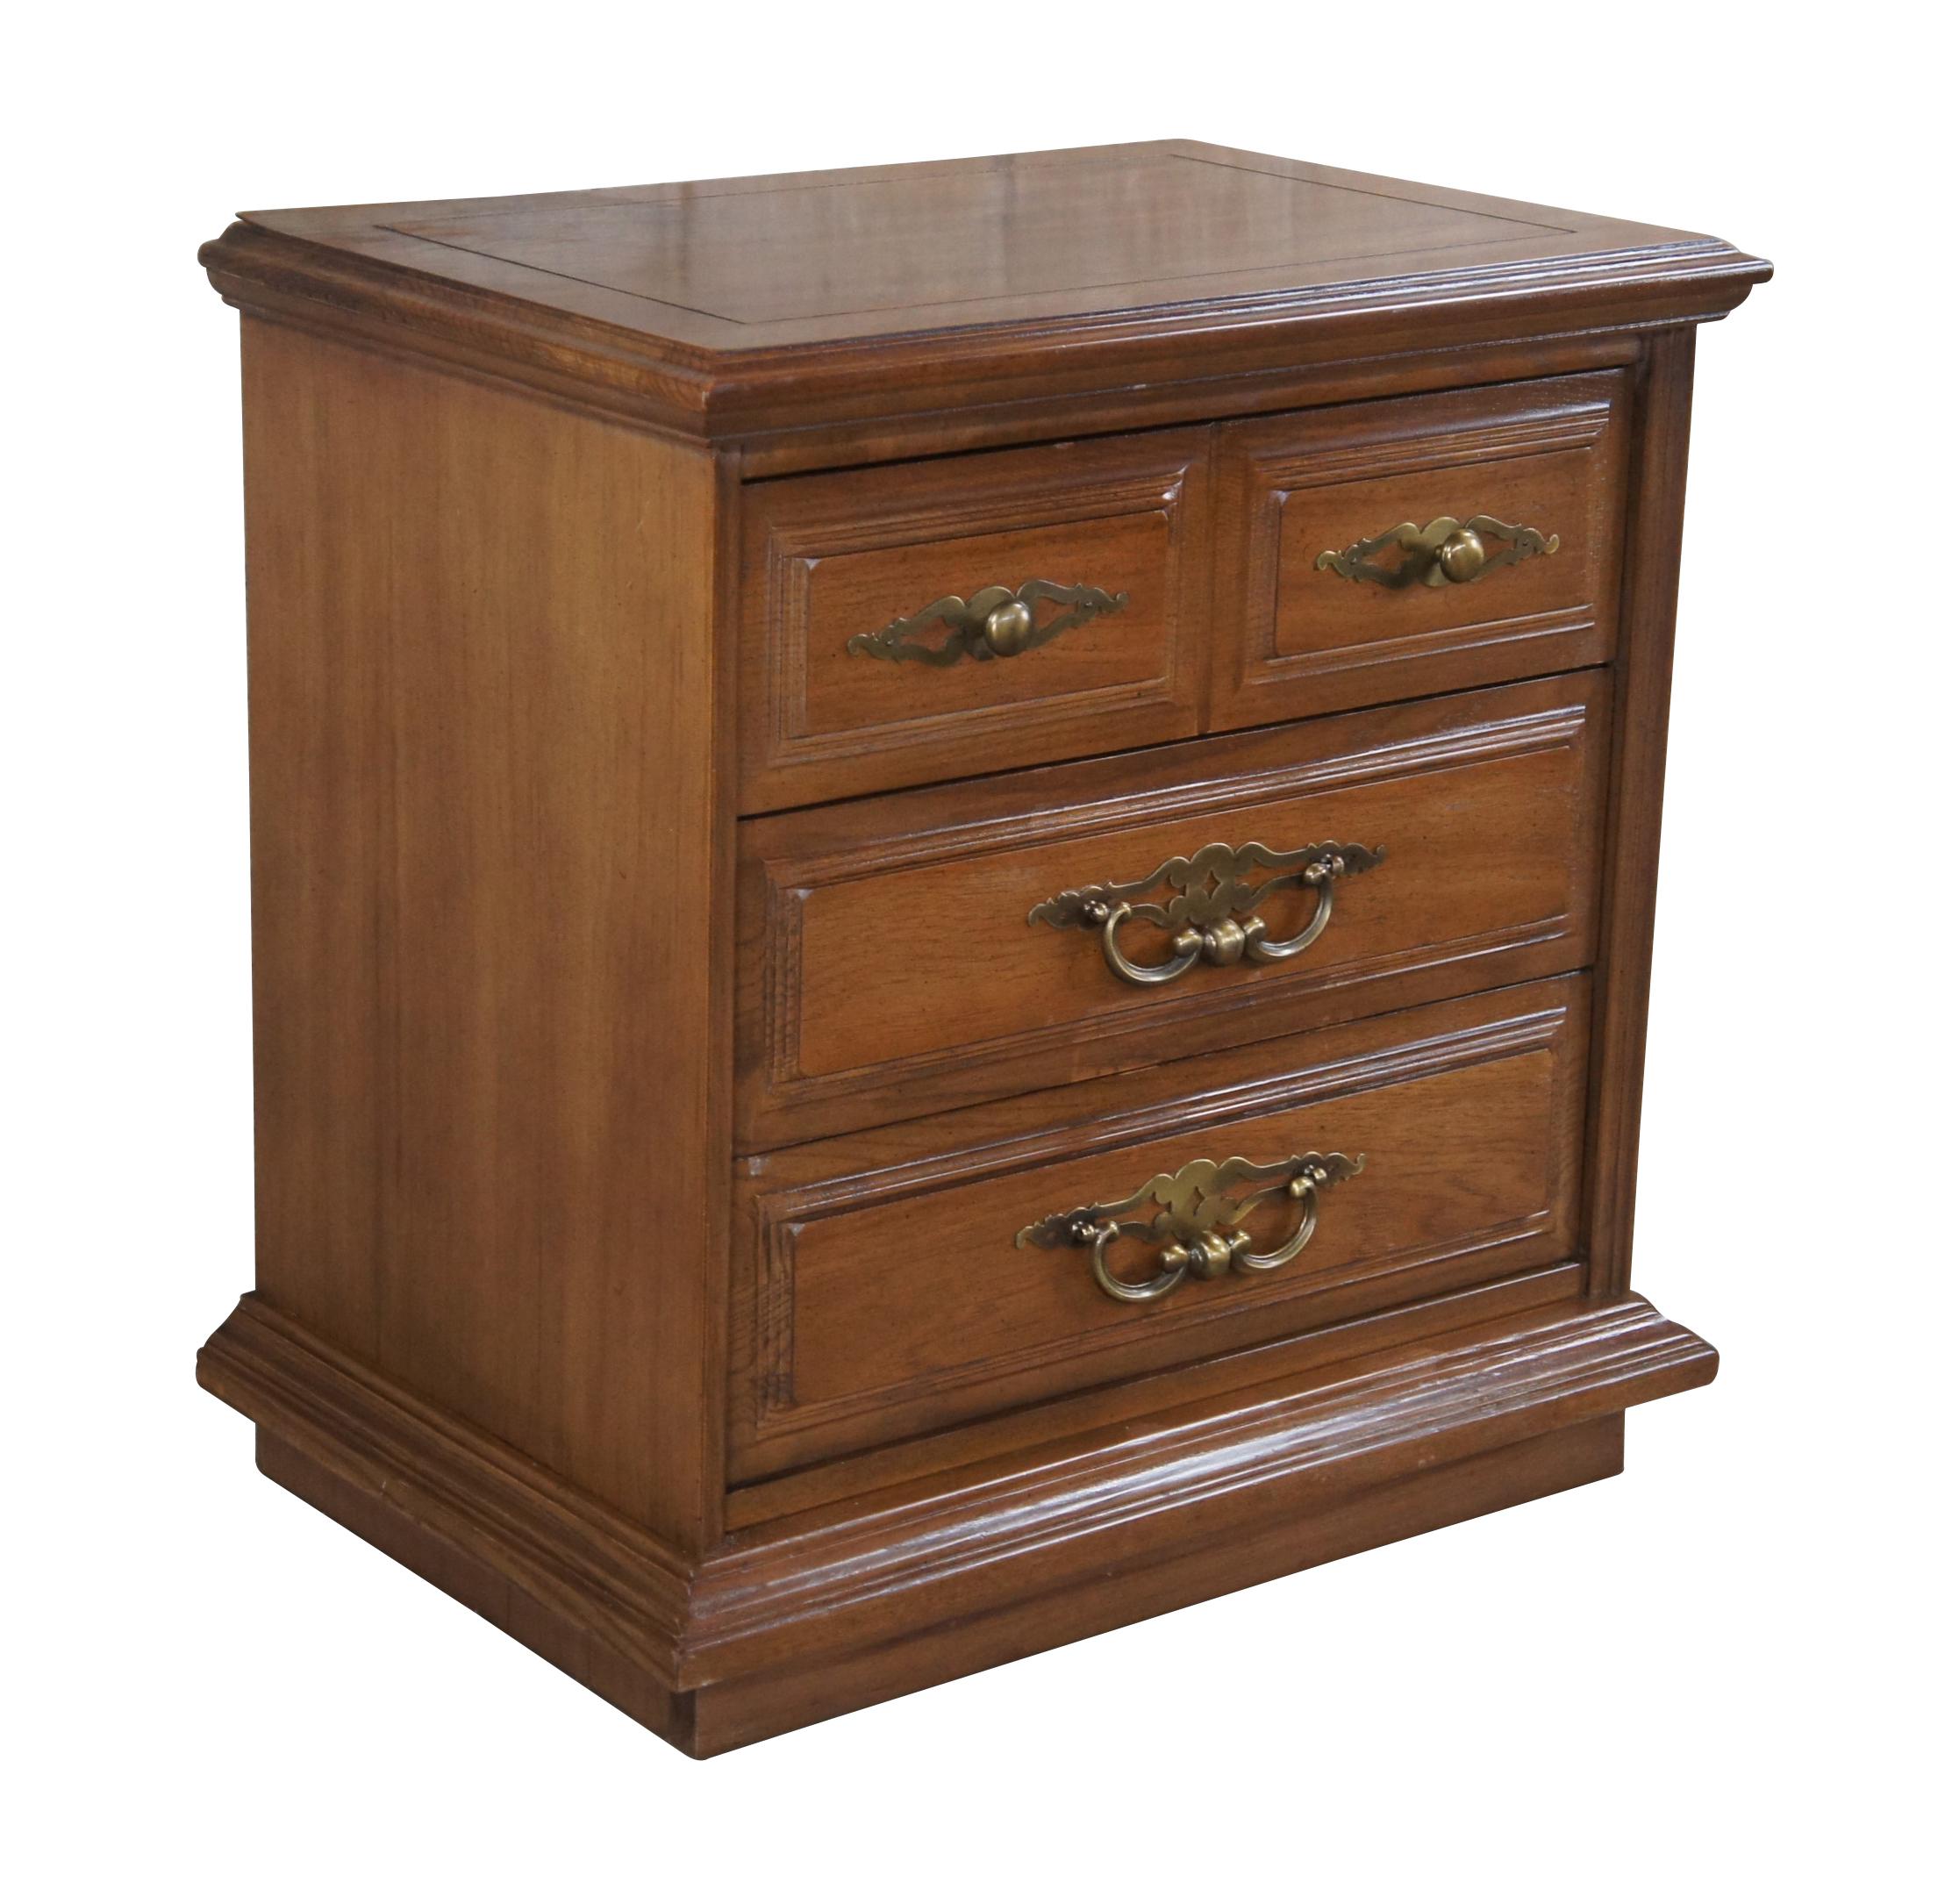 Stanley Furniture nightstand, circa 1980s.  Made from oak with three dovetailed drawers and brass hardware.

Dimensions: 
25